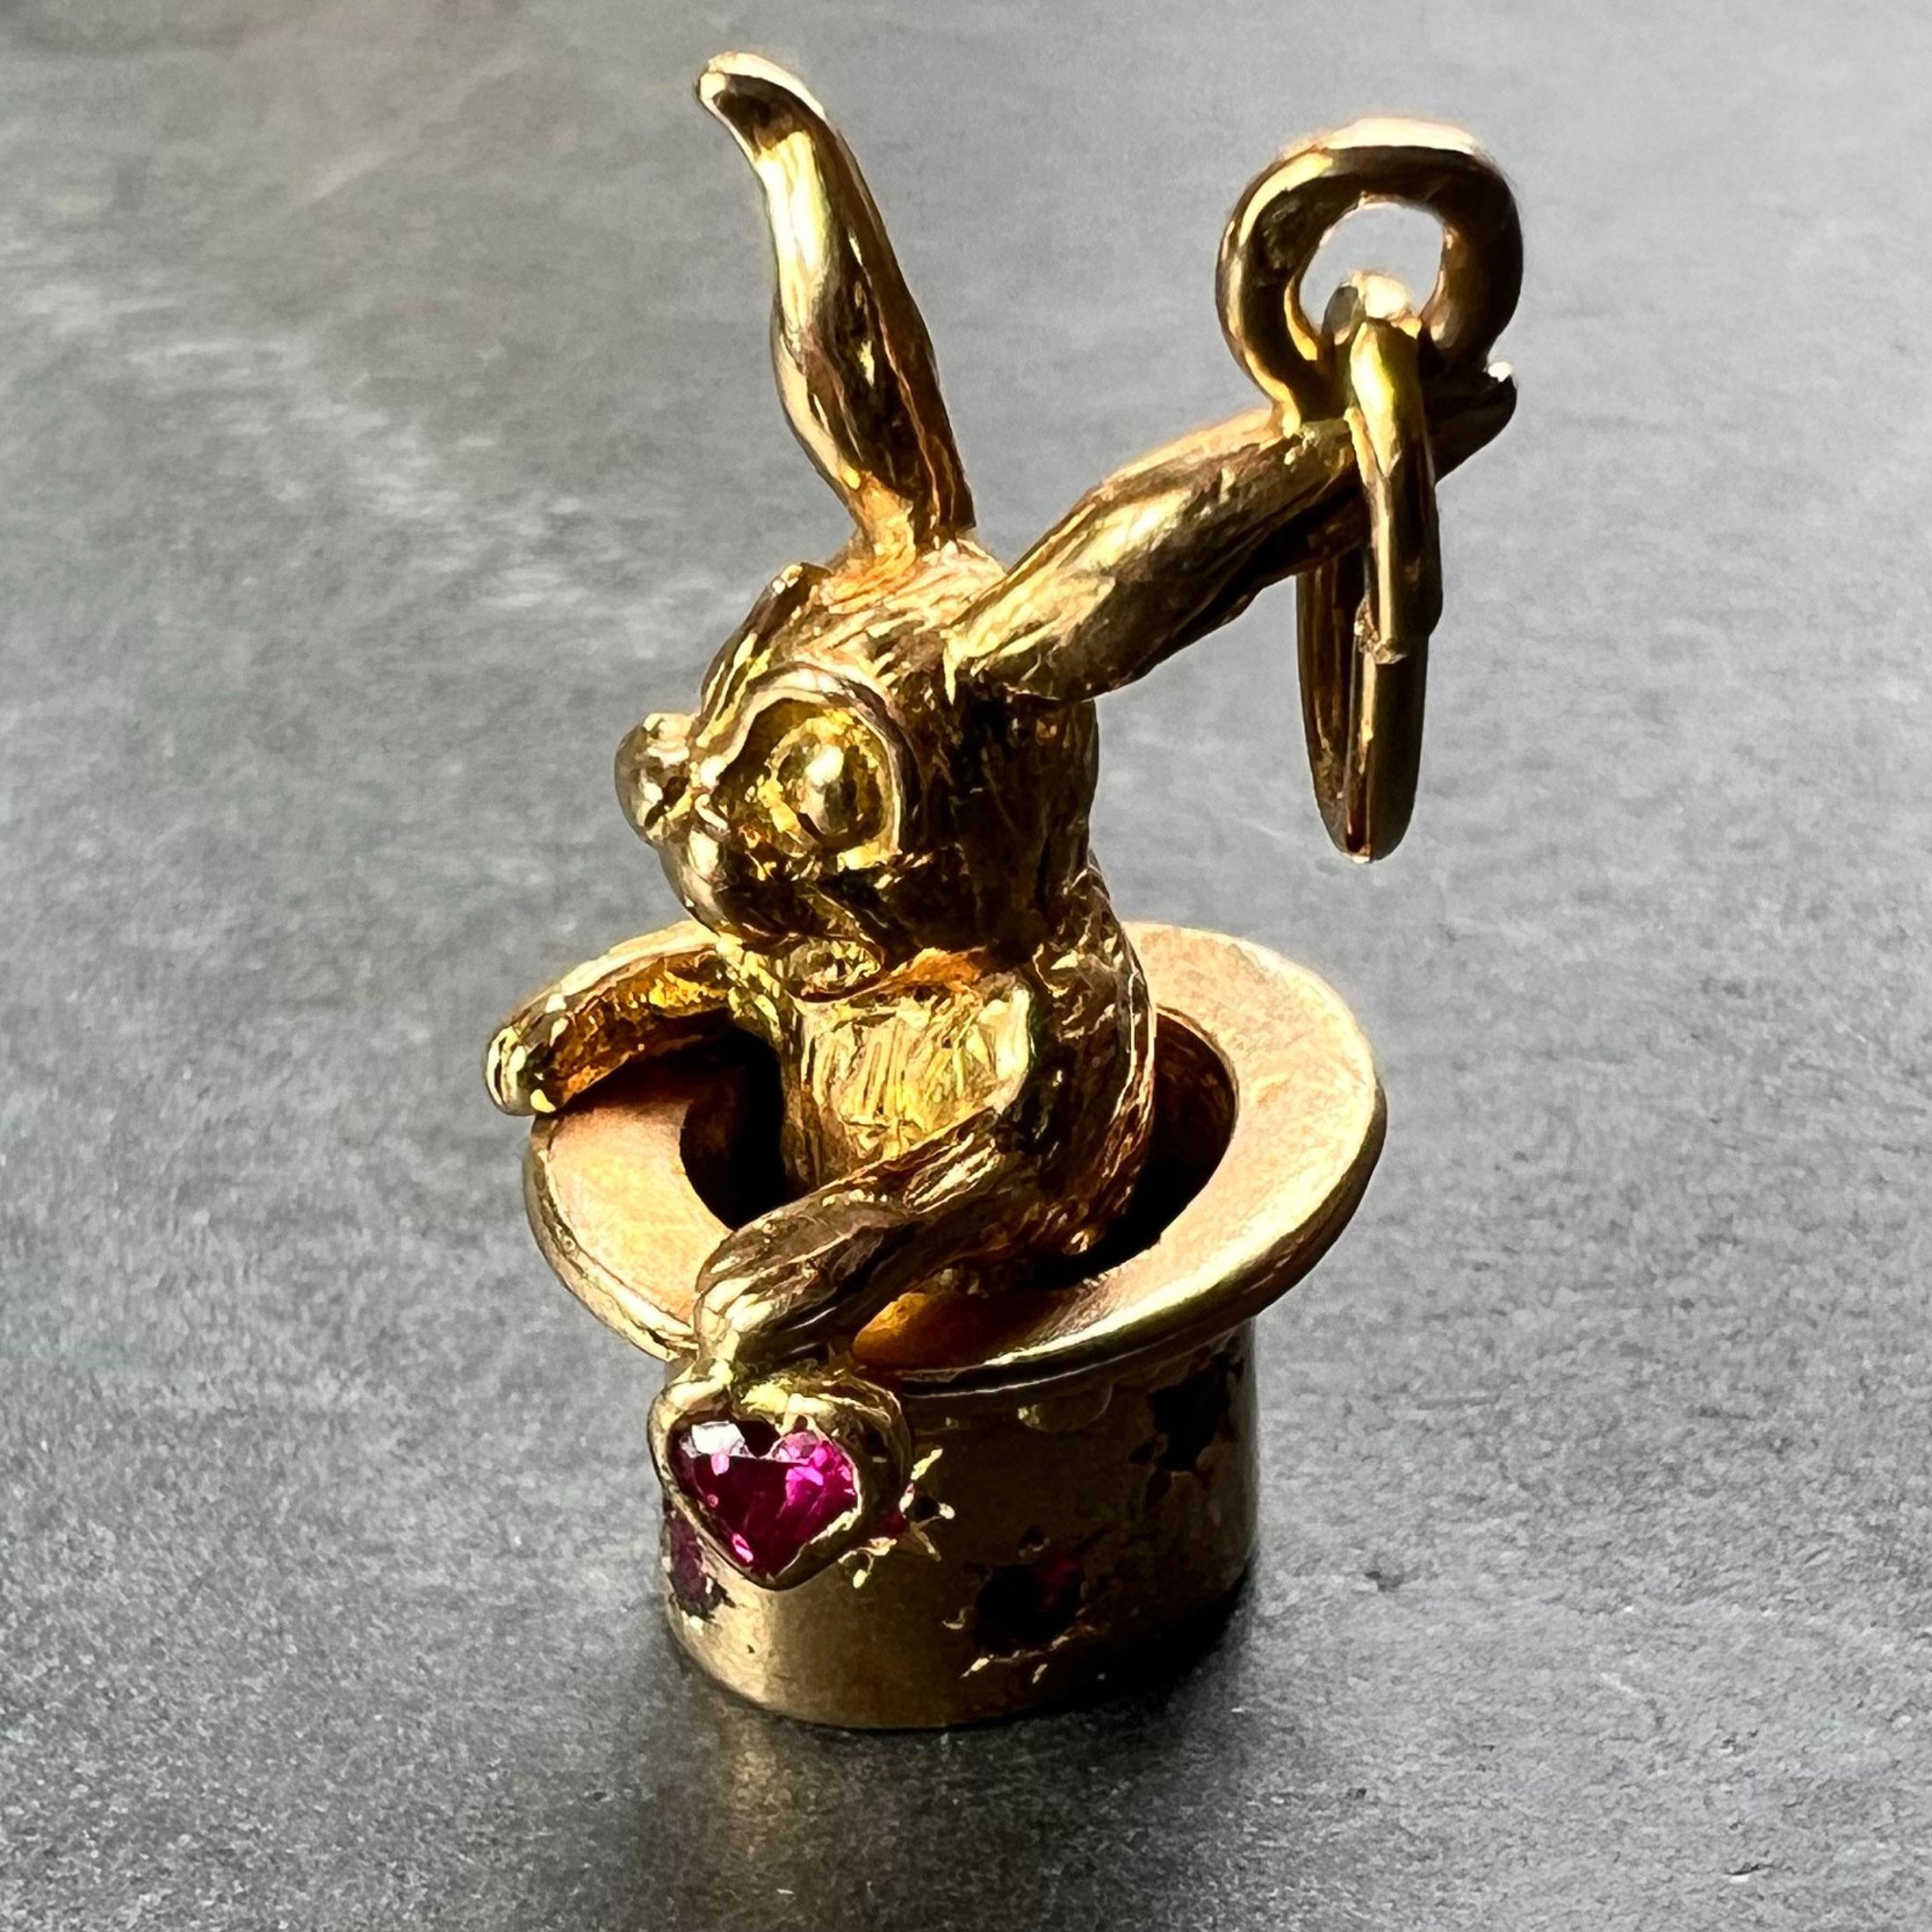 A French 18 karat (18K) yellow gold charm pendant designed as a magician’s top hat set with eight round rubies, containing a moving rabbit holding a ruby heart. Stamped with the eagle's head for 18 karat gold and French manufacture.

Dimensions: 2.4